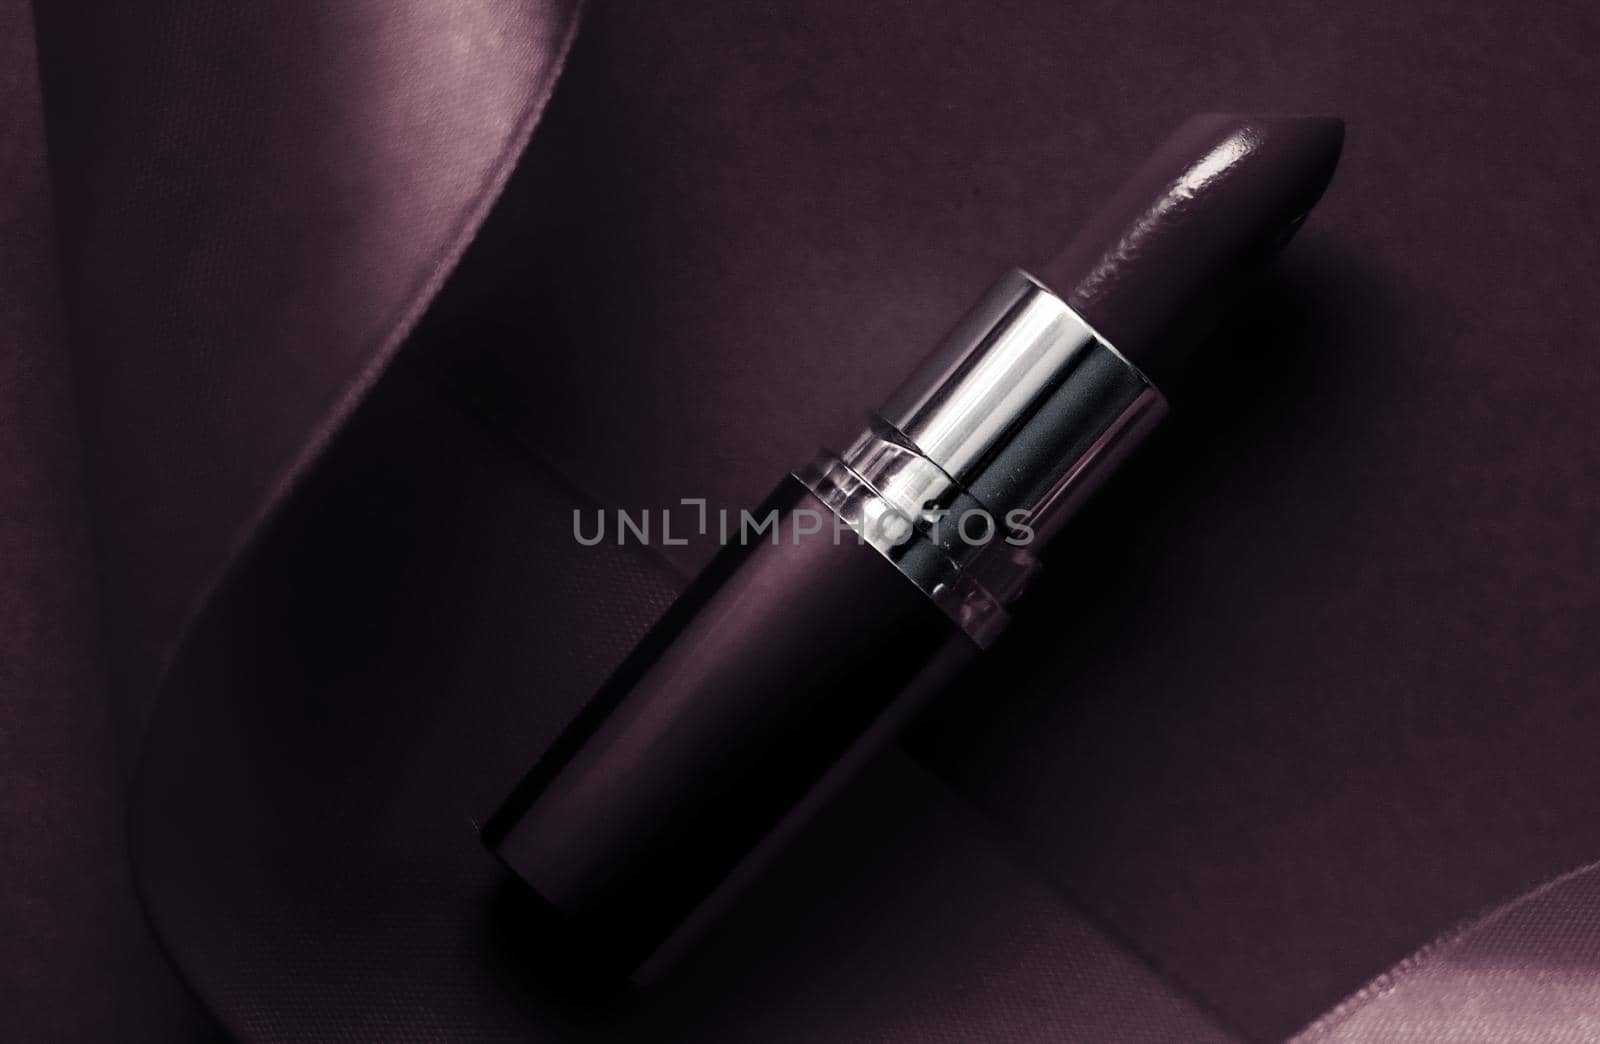 Luxury lipstick and silk ribbon on dark purple holiday background, make-up and cosmetics flatlay for beauty brand product design by Anneleven